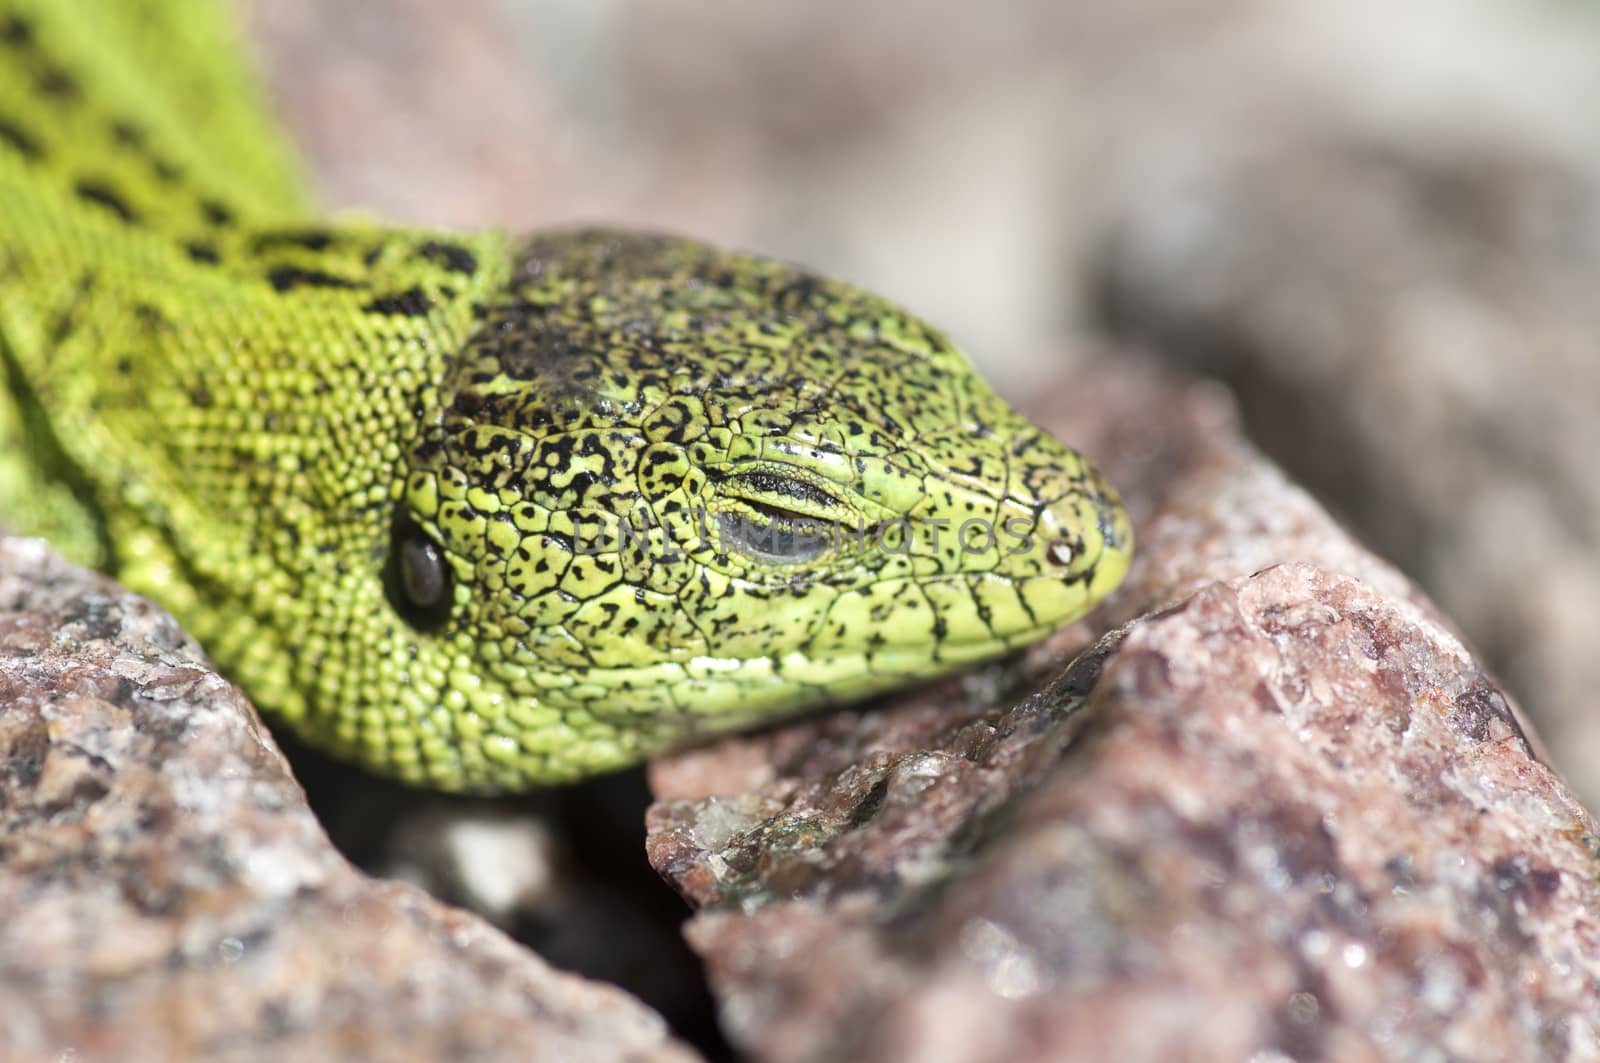 Sand lizard (Lacerta agilis) male sunbathing close up by dred